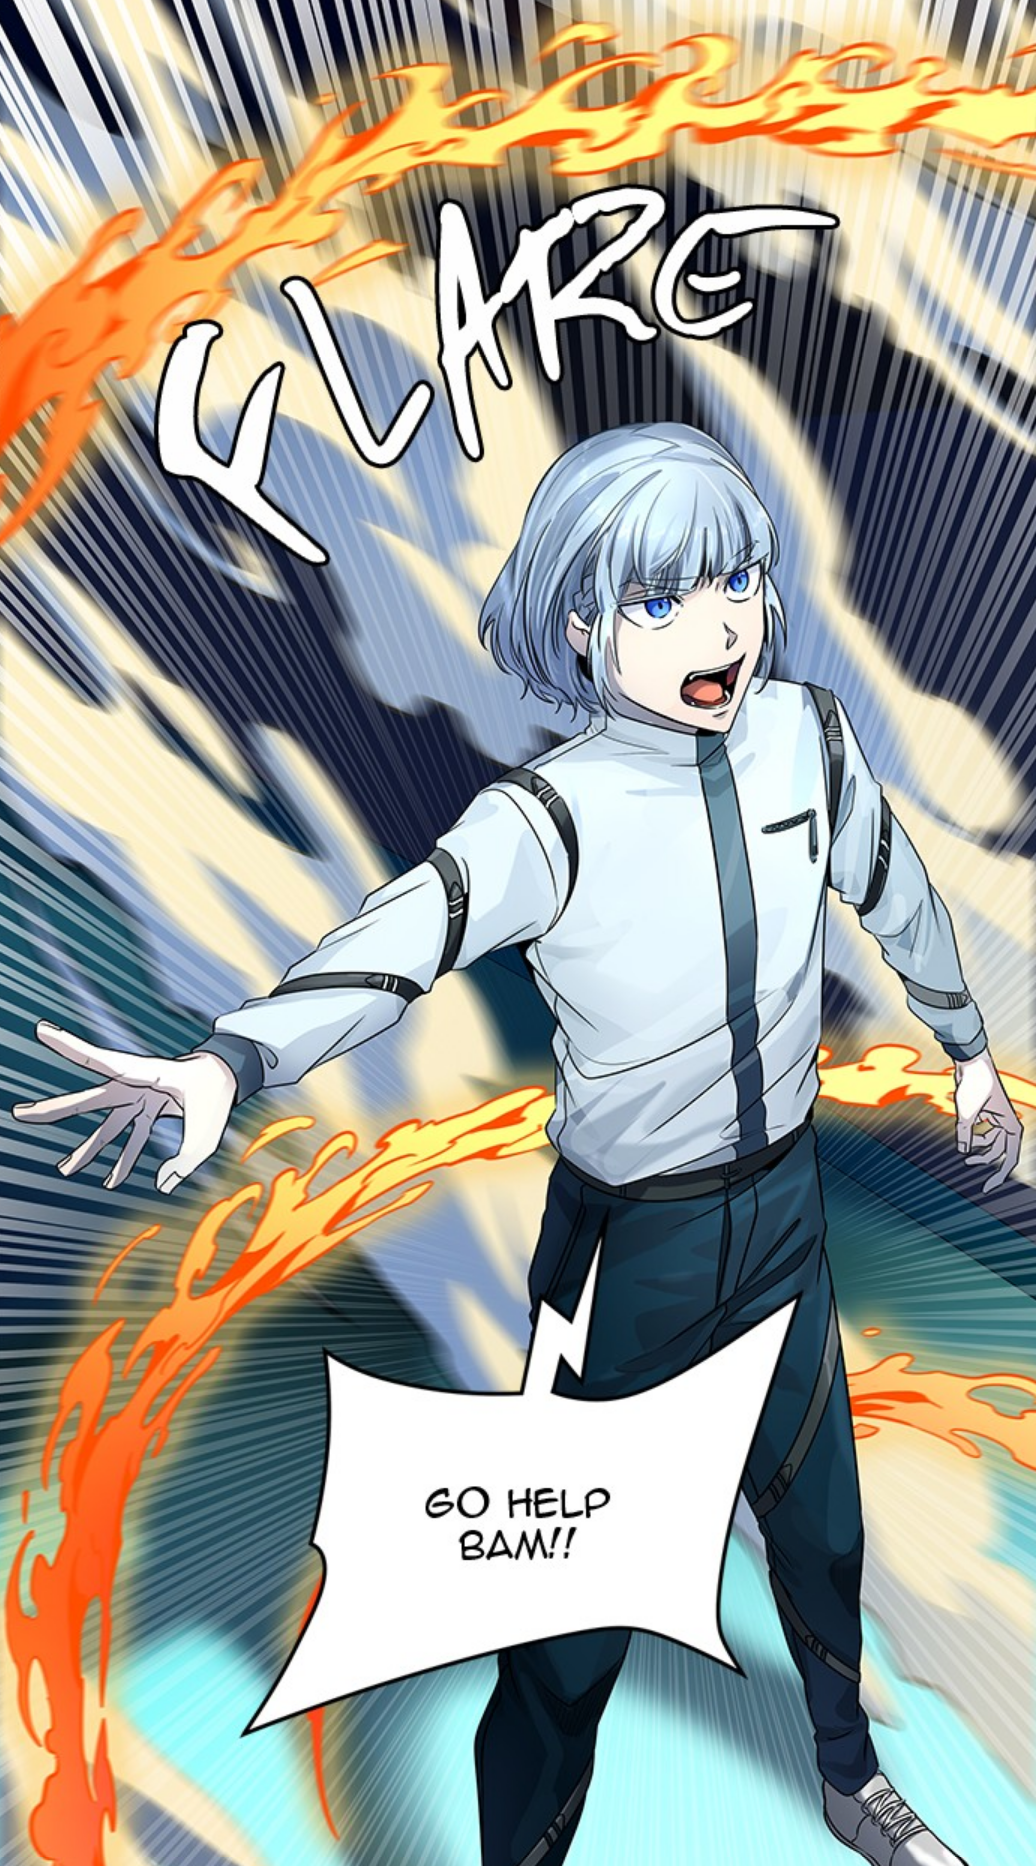 Tower of God 511 Aguero uses fire fish to help Bam